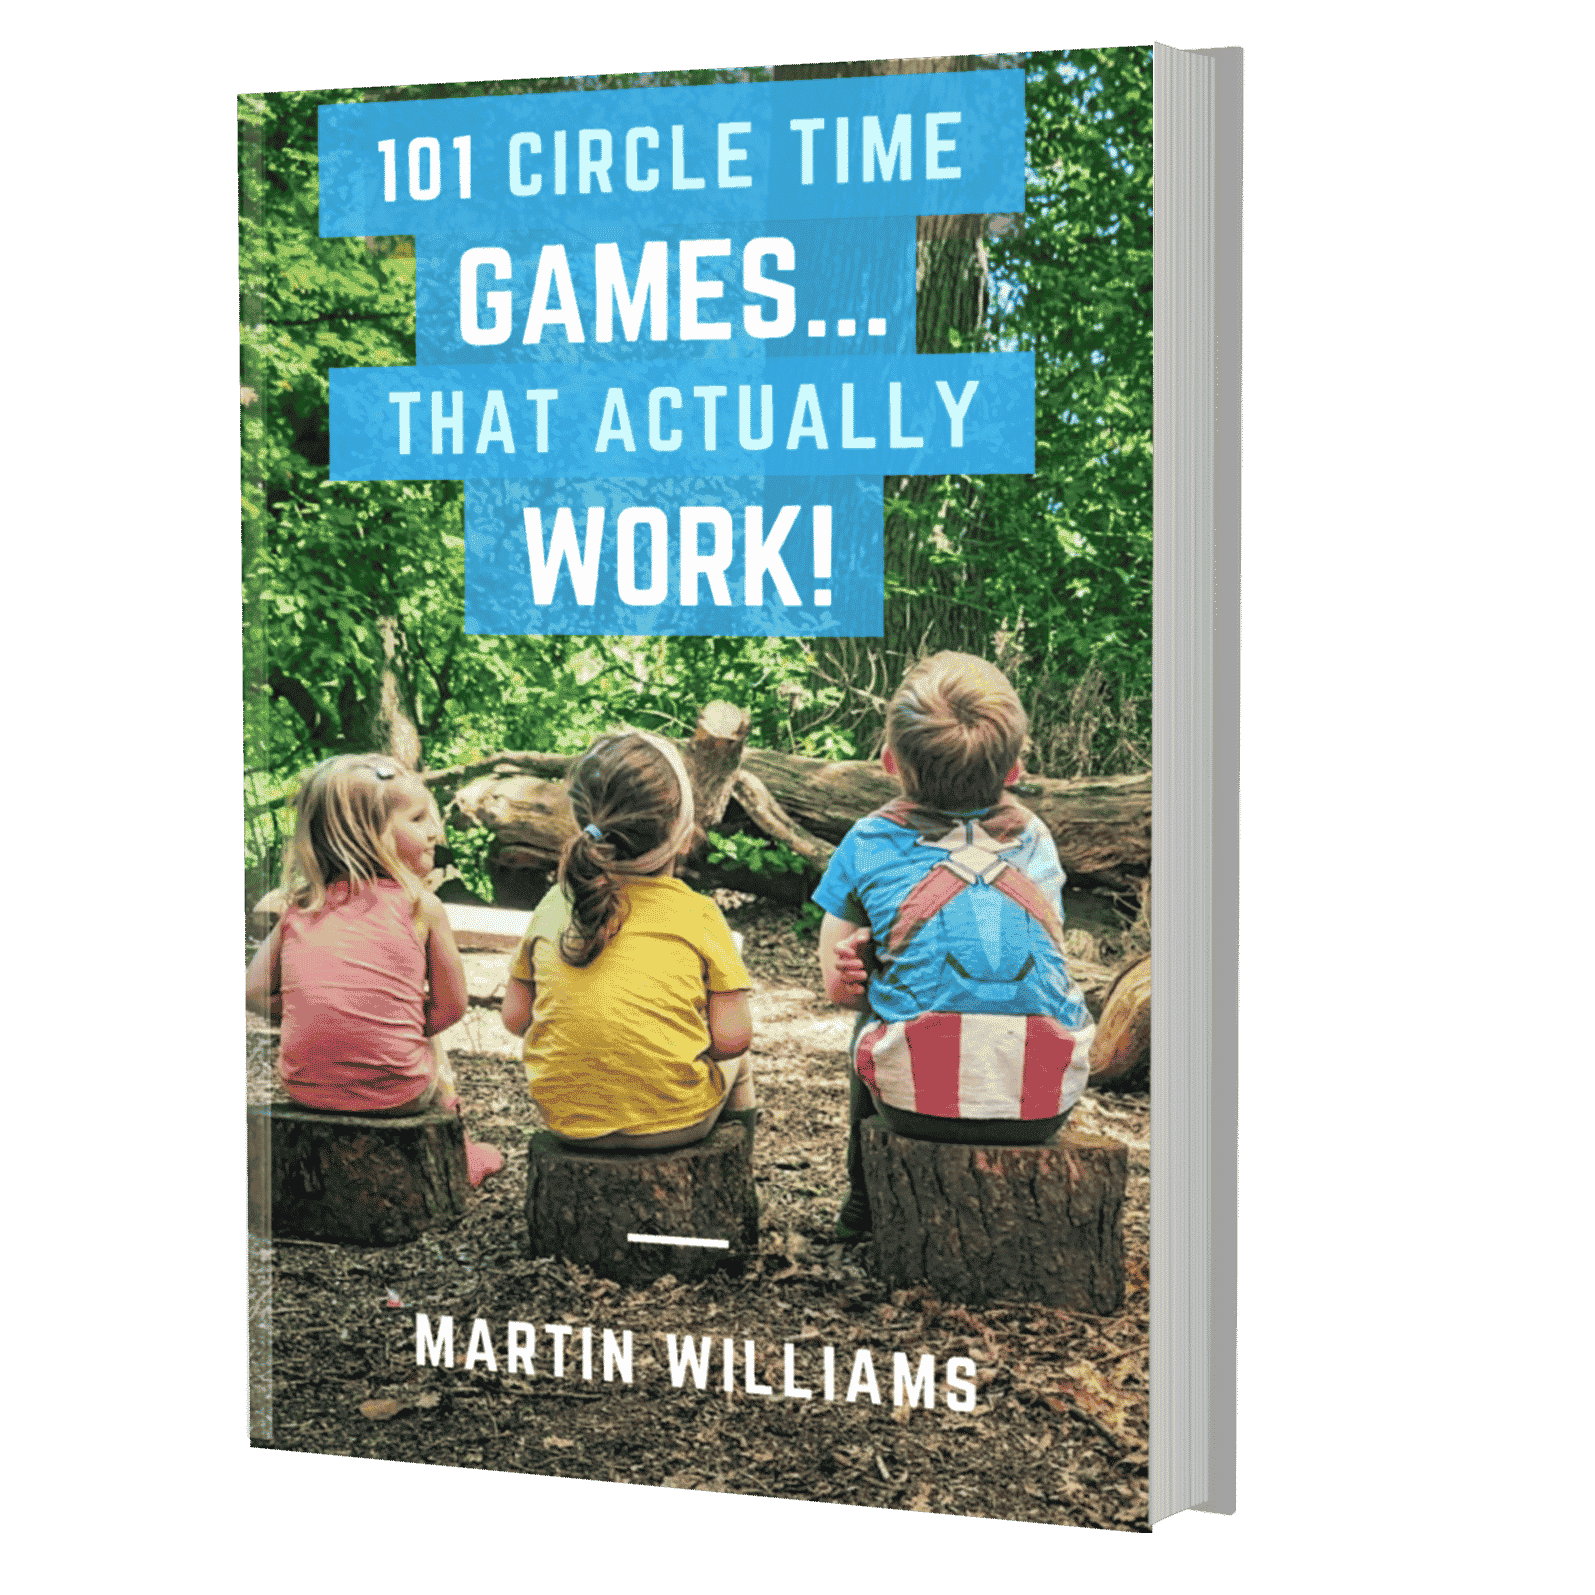 22 Tag Games For Kids - The Ultimate Guide - Early Impact Learning